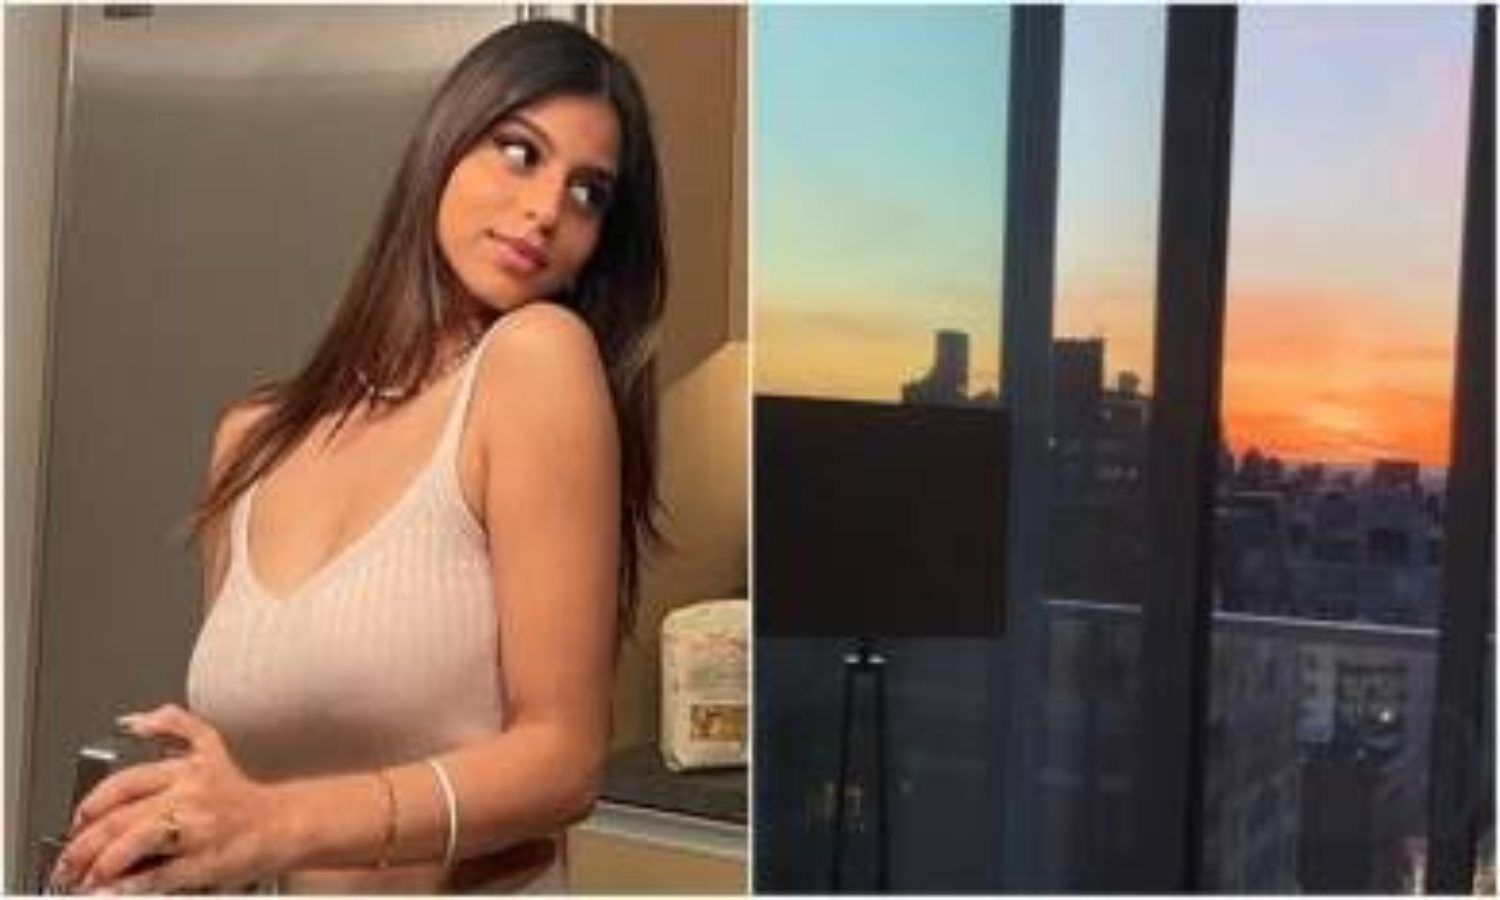 Suhana Khan Lifestyle: From expensive clothes to expensive cars and luxurious houses, Suhana Khan lives